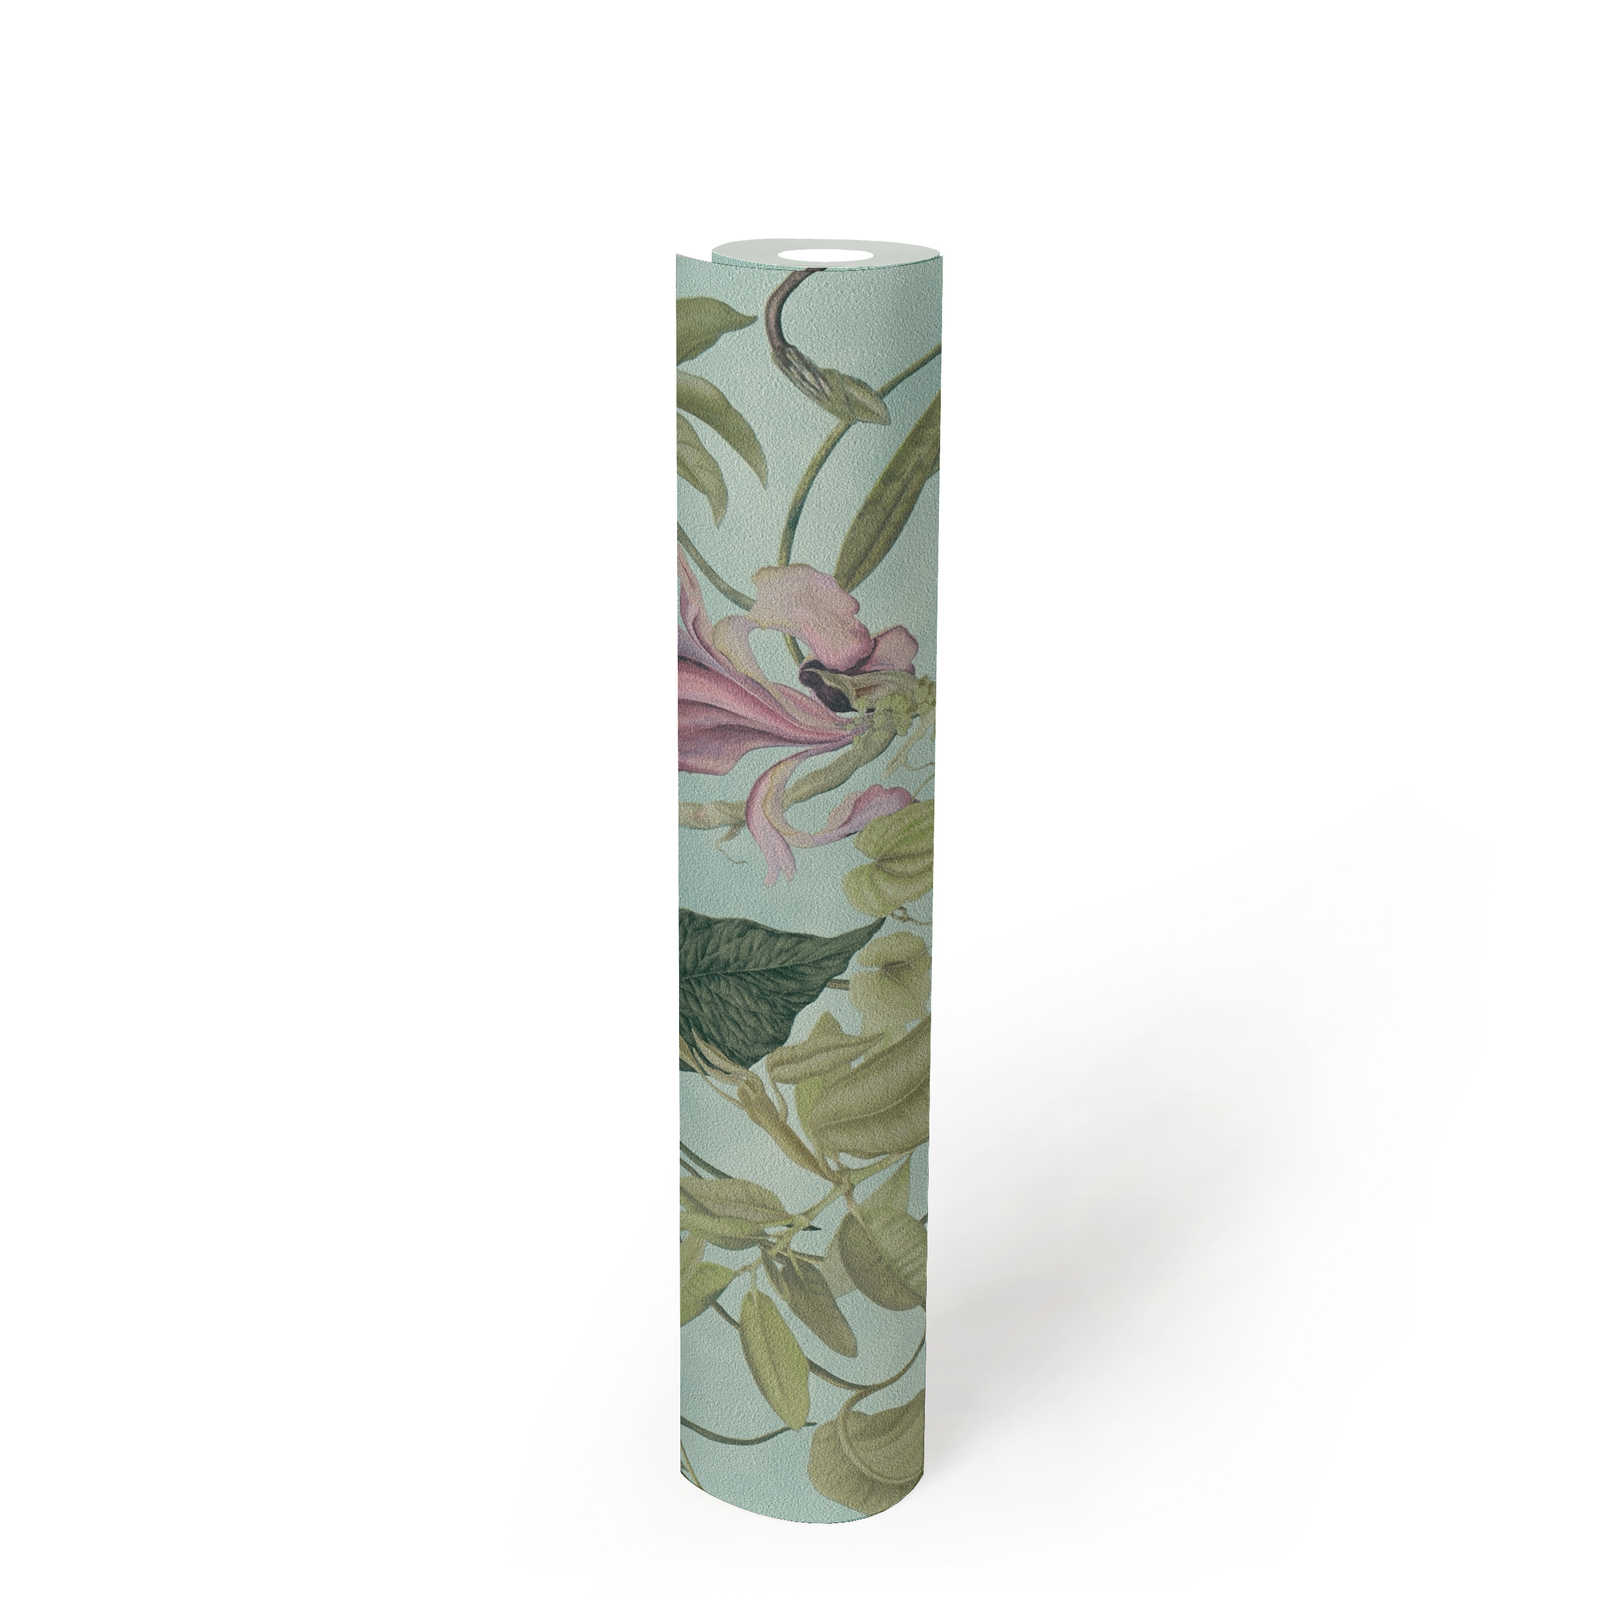             Non-woven wallpaper tropical flowers by MICHALSKY - green, blue
        